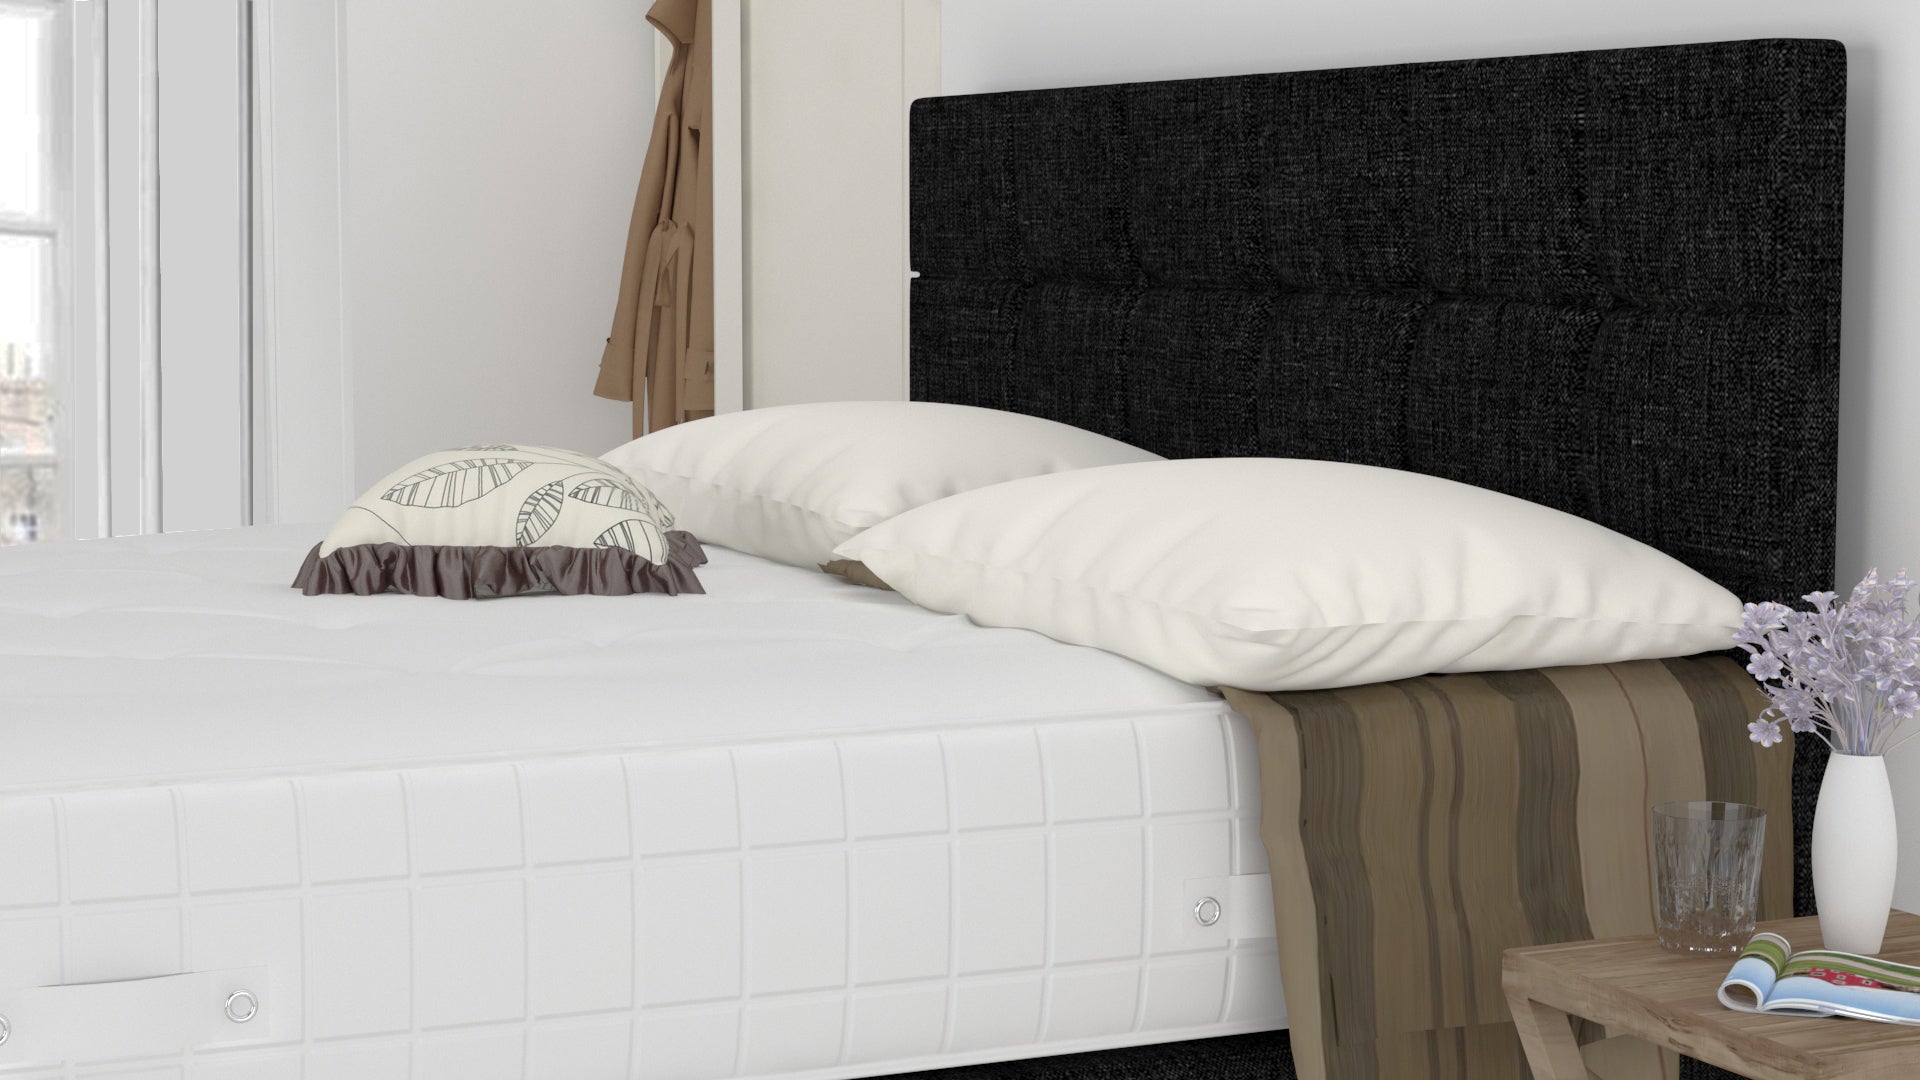 Black Venice 6 Feet Divan Bed Set With Cube Headboard (Included Feet) And Free Orthopedic Mattress.